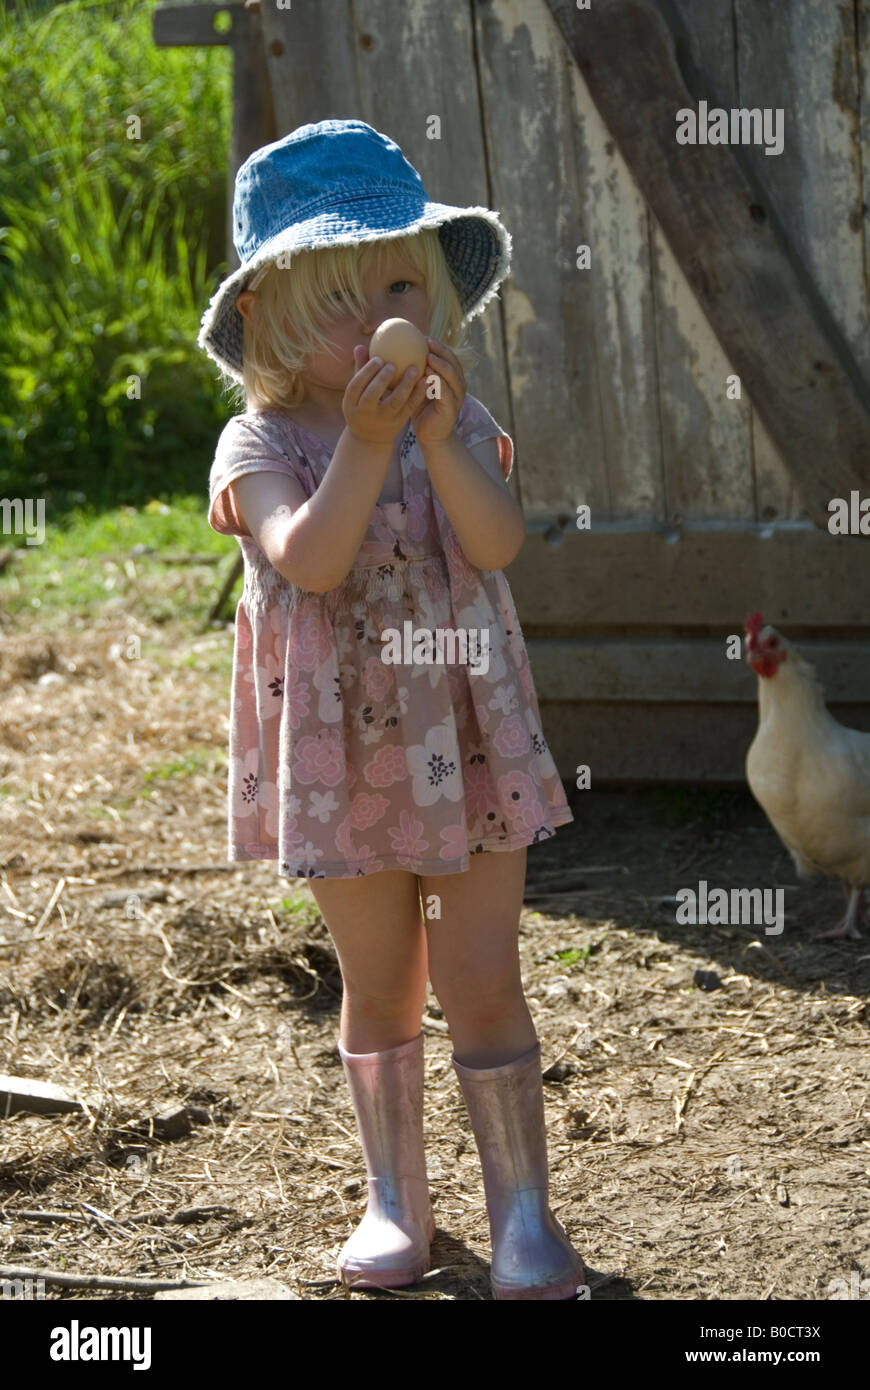 Stock photo of a two year old blond haired girl showing off an egg she has just collected from the free range chickens Stock Photo